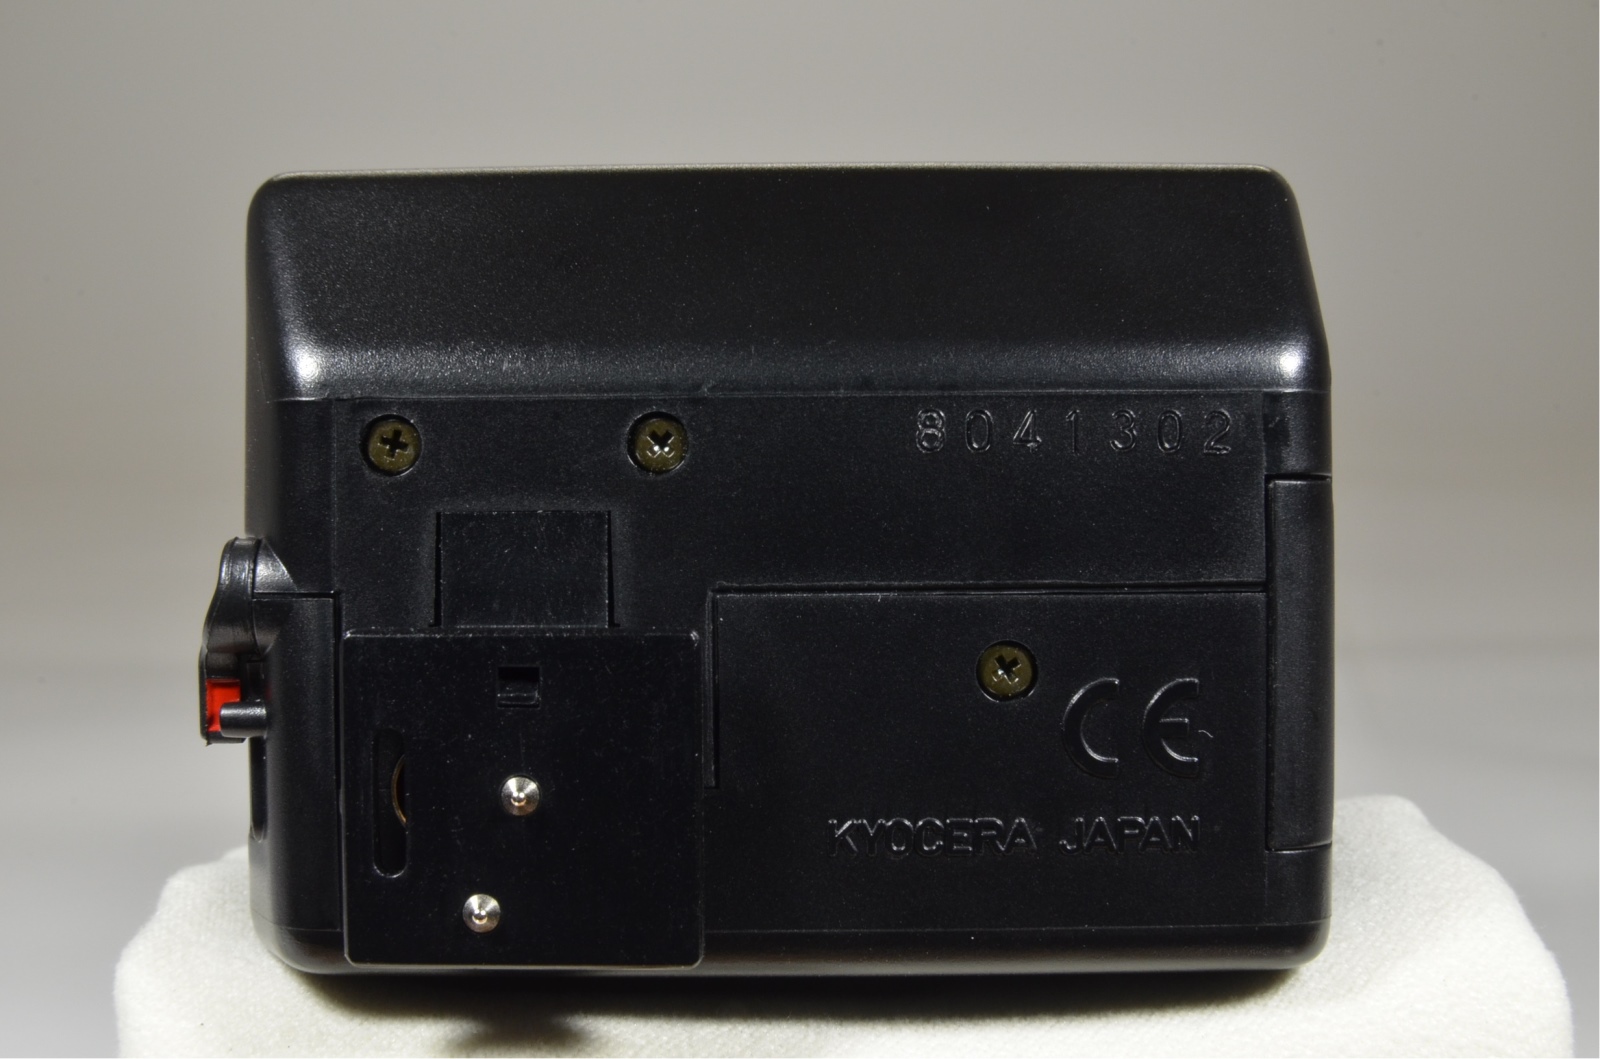 contax flash tla200 black for g1, g2 from japan